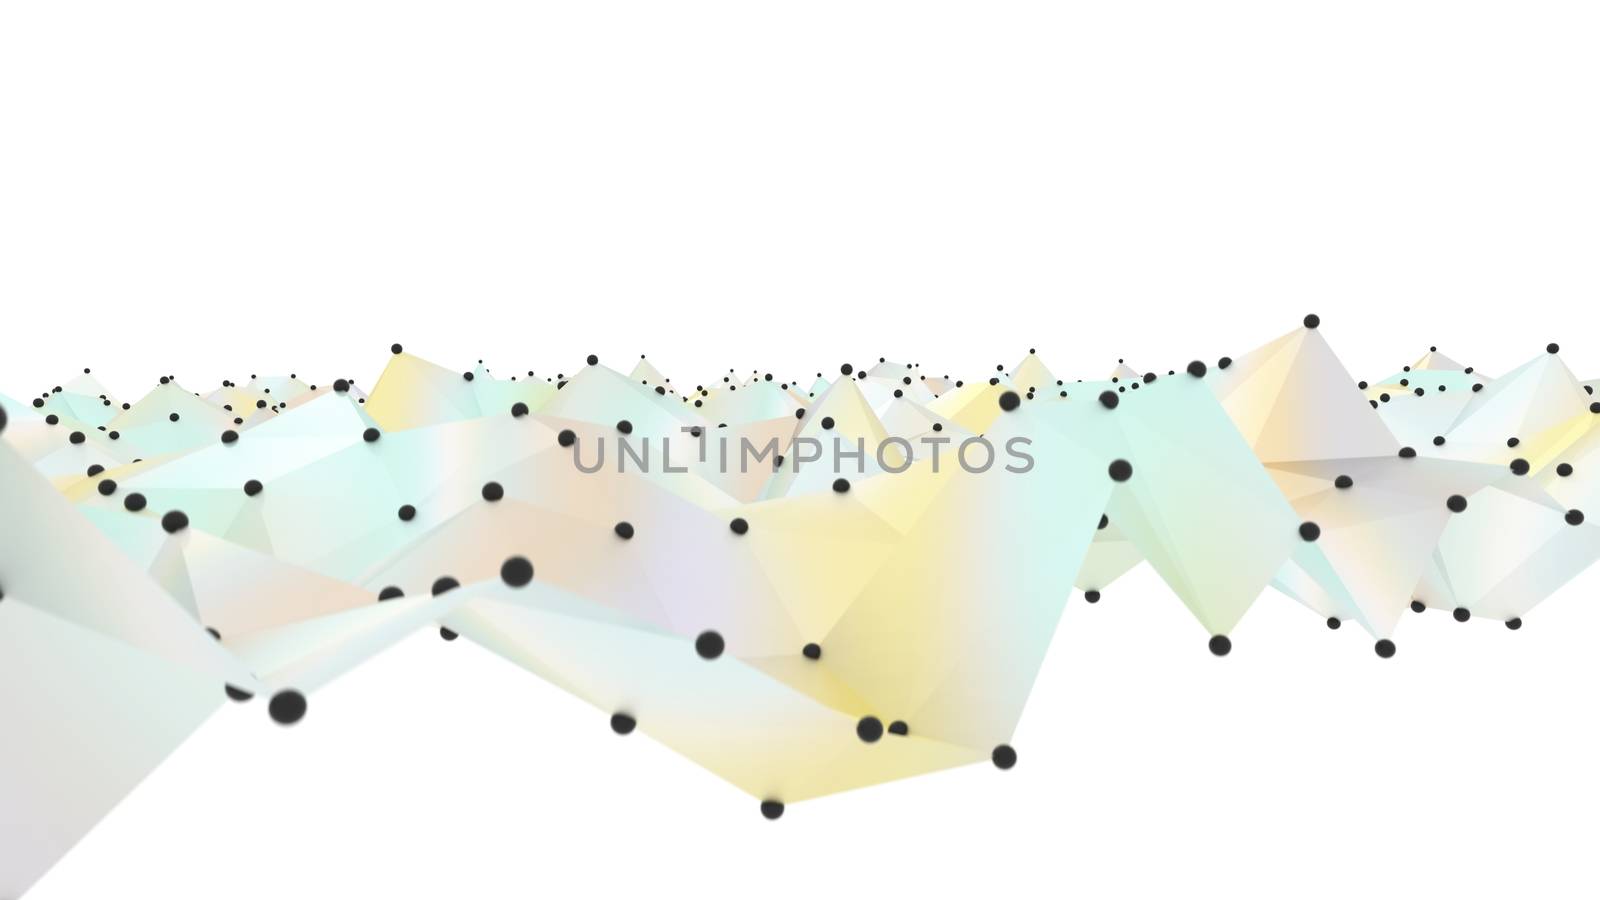 Concept of Network, Internet Communication. The black points are connected by lines and color polygons. 3D Illustration